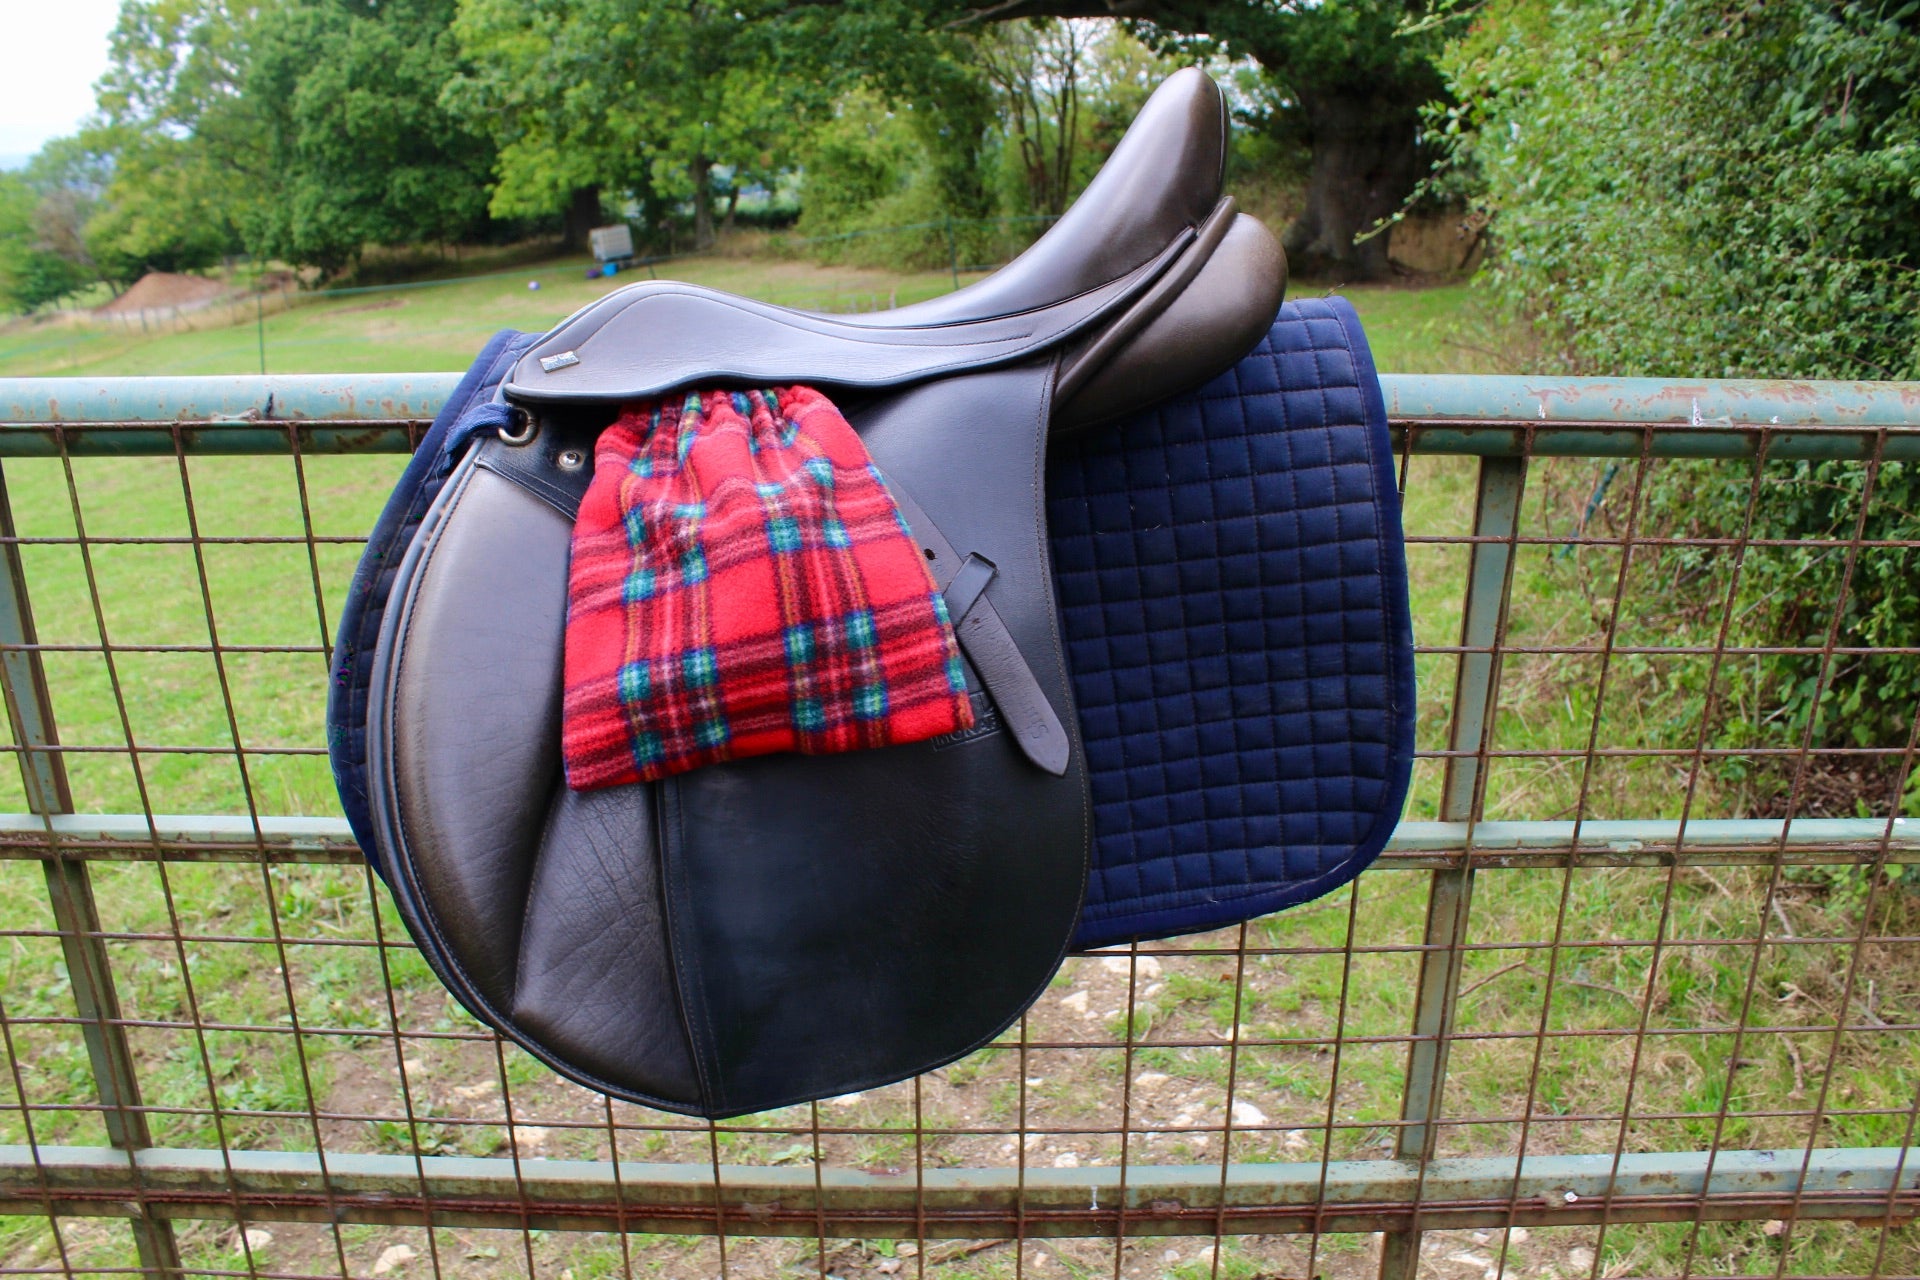 red tarten stirrup covers on a brown monarch saddle which has a navy le Mieux saddle pad under, on a field fence